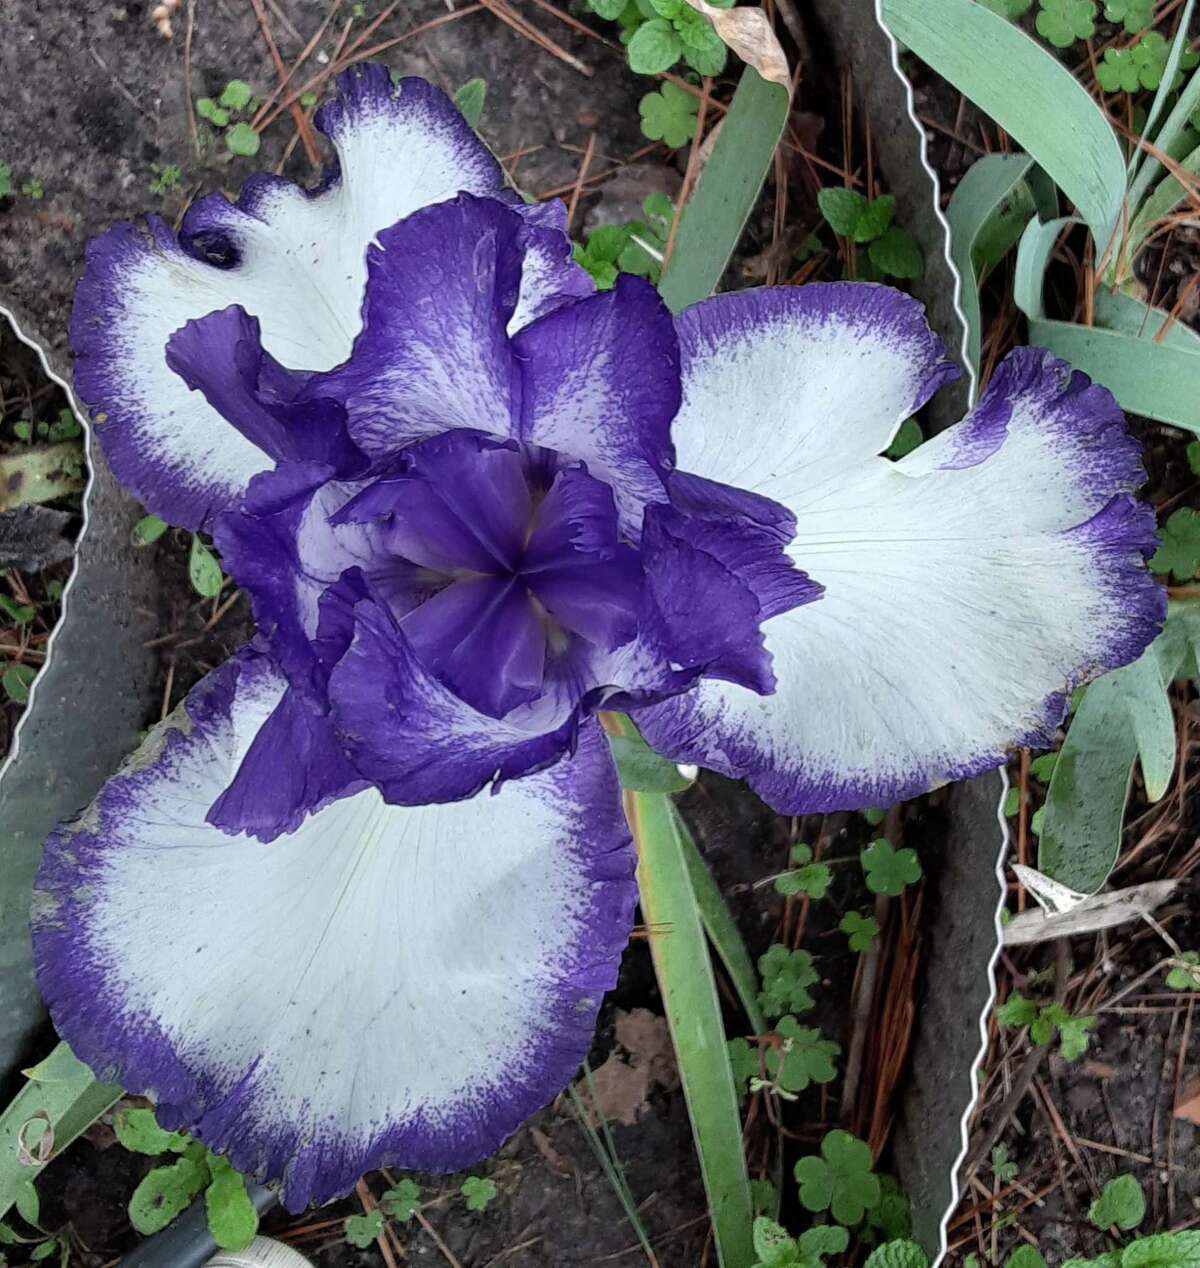 Iris is the ancient Greek goddess of the rainbow, and the iris may take that moniker from the fact that it comes in a rainbow of colors.